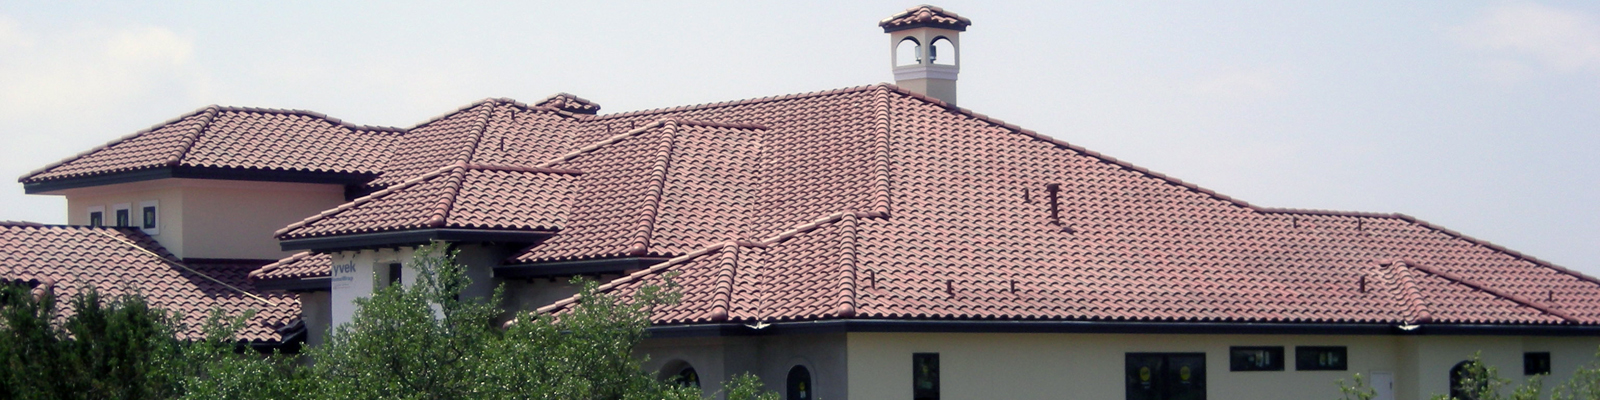 Imperial Roofing - Residential